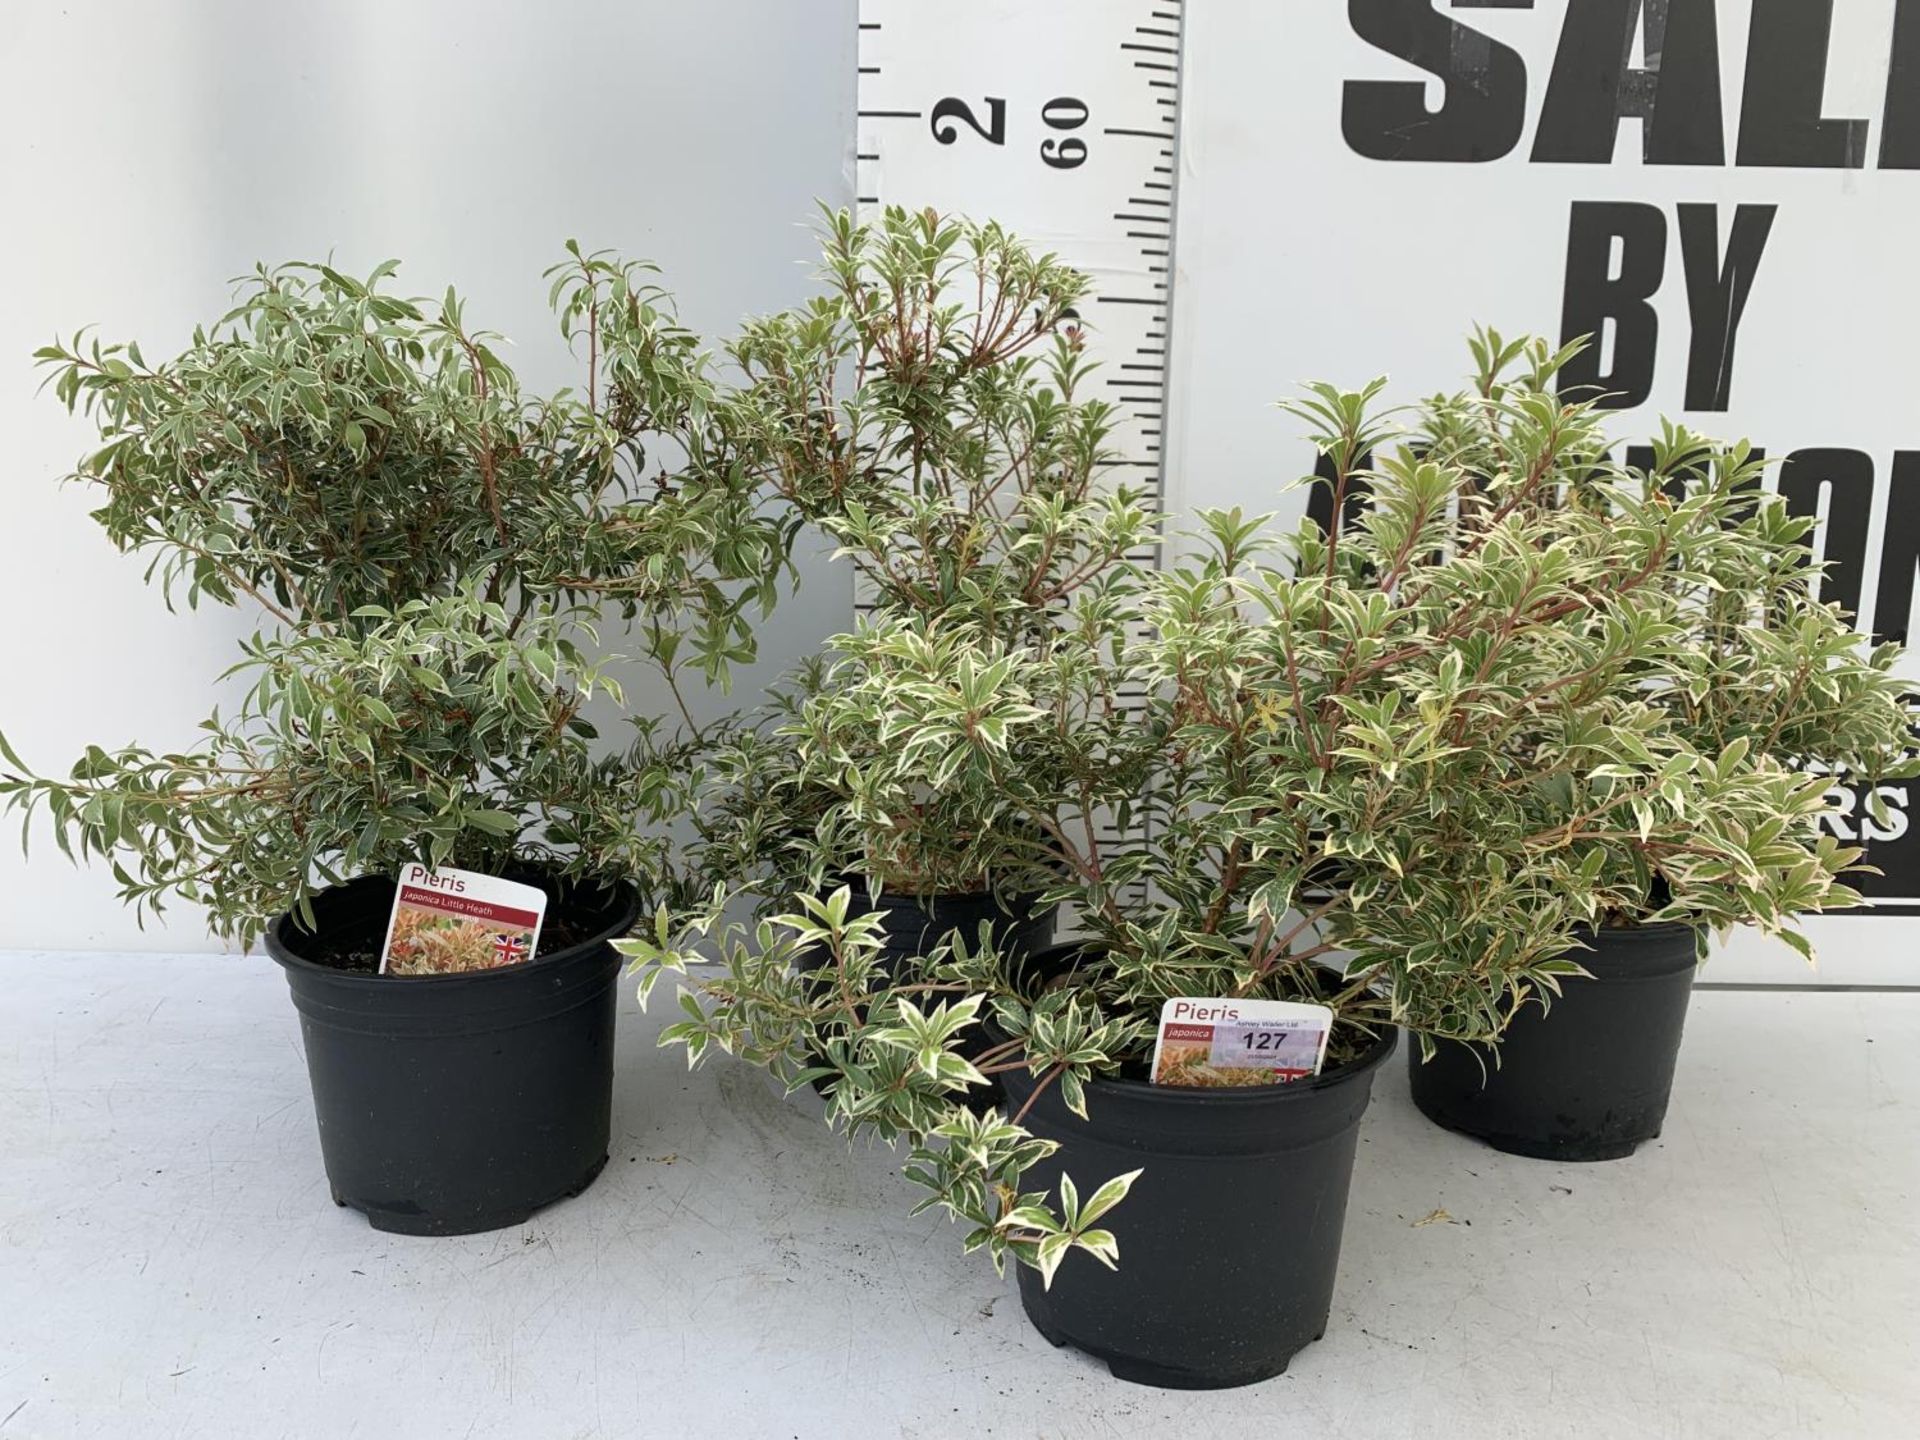 FOUR PIERIS LITTLE HEATH 45CM TALL IN 2 LTR POTS TO BE SOLD FOR THE FOUR PLUS VAT